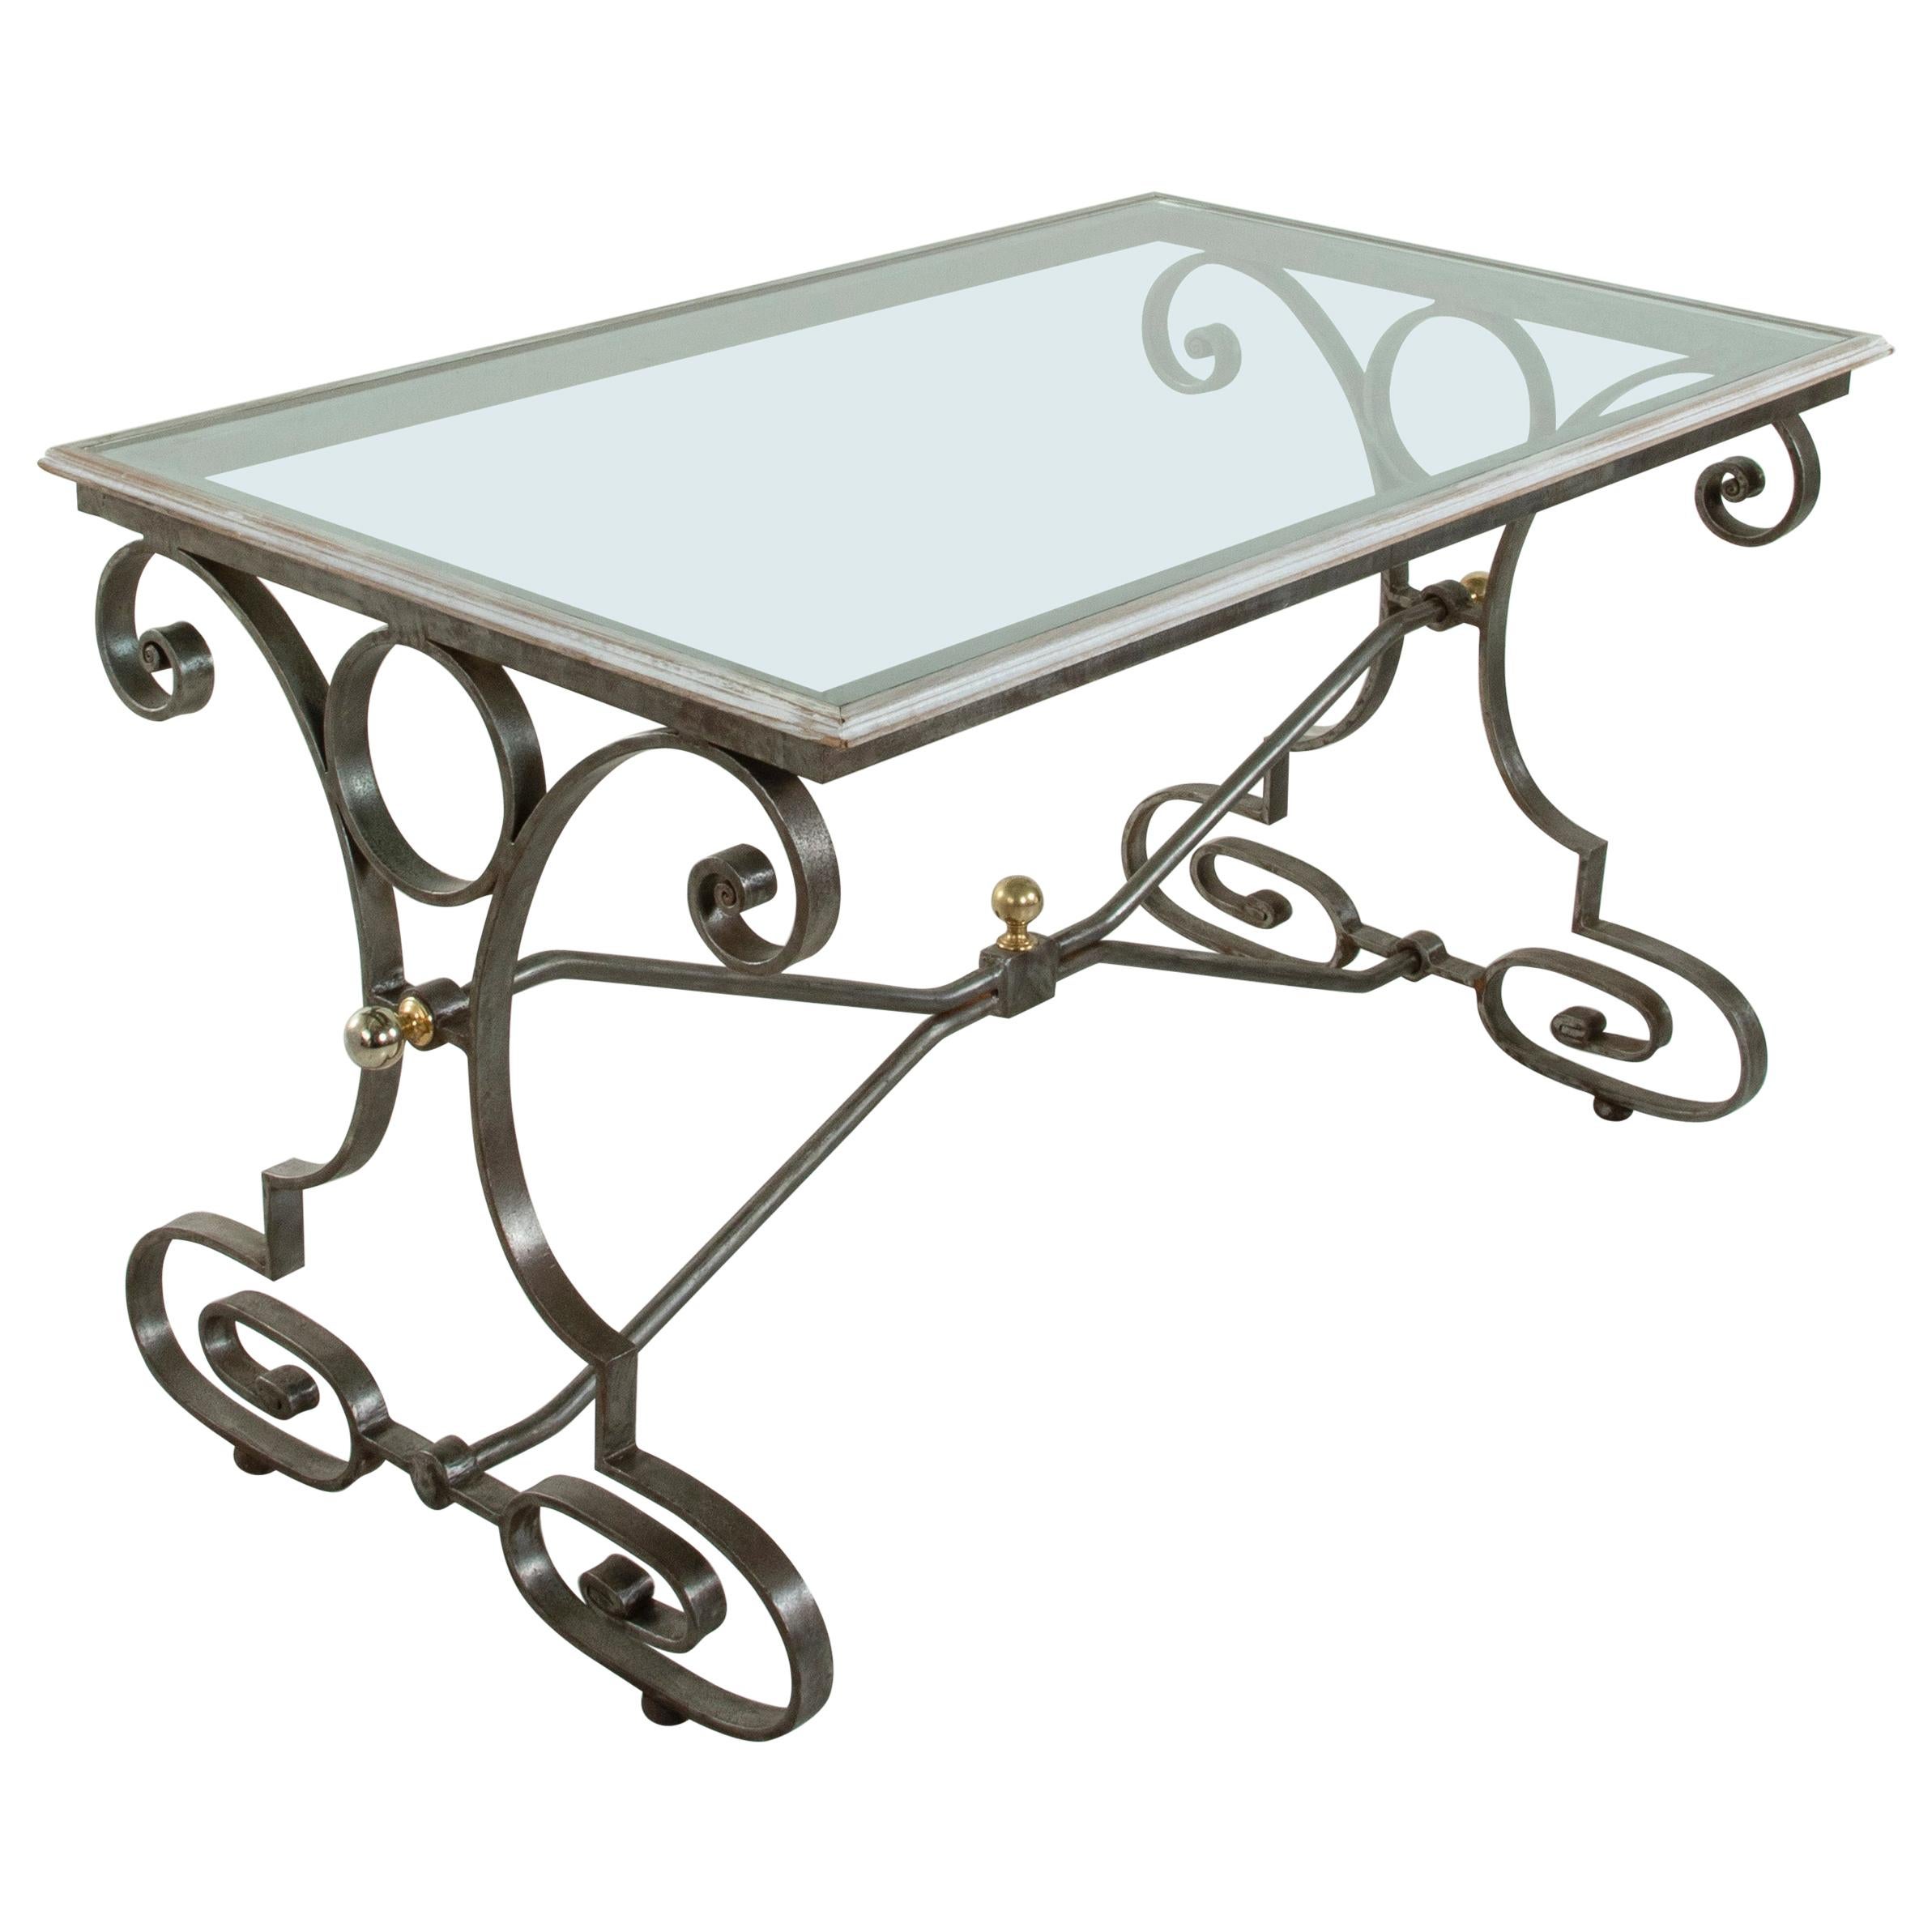 Mid 20th Century French Wrought Iron and Bronze Outdoor Dining Table, Glass Top